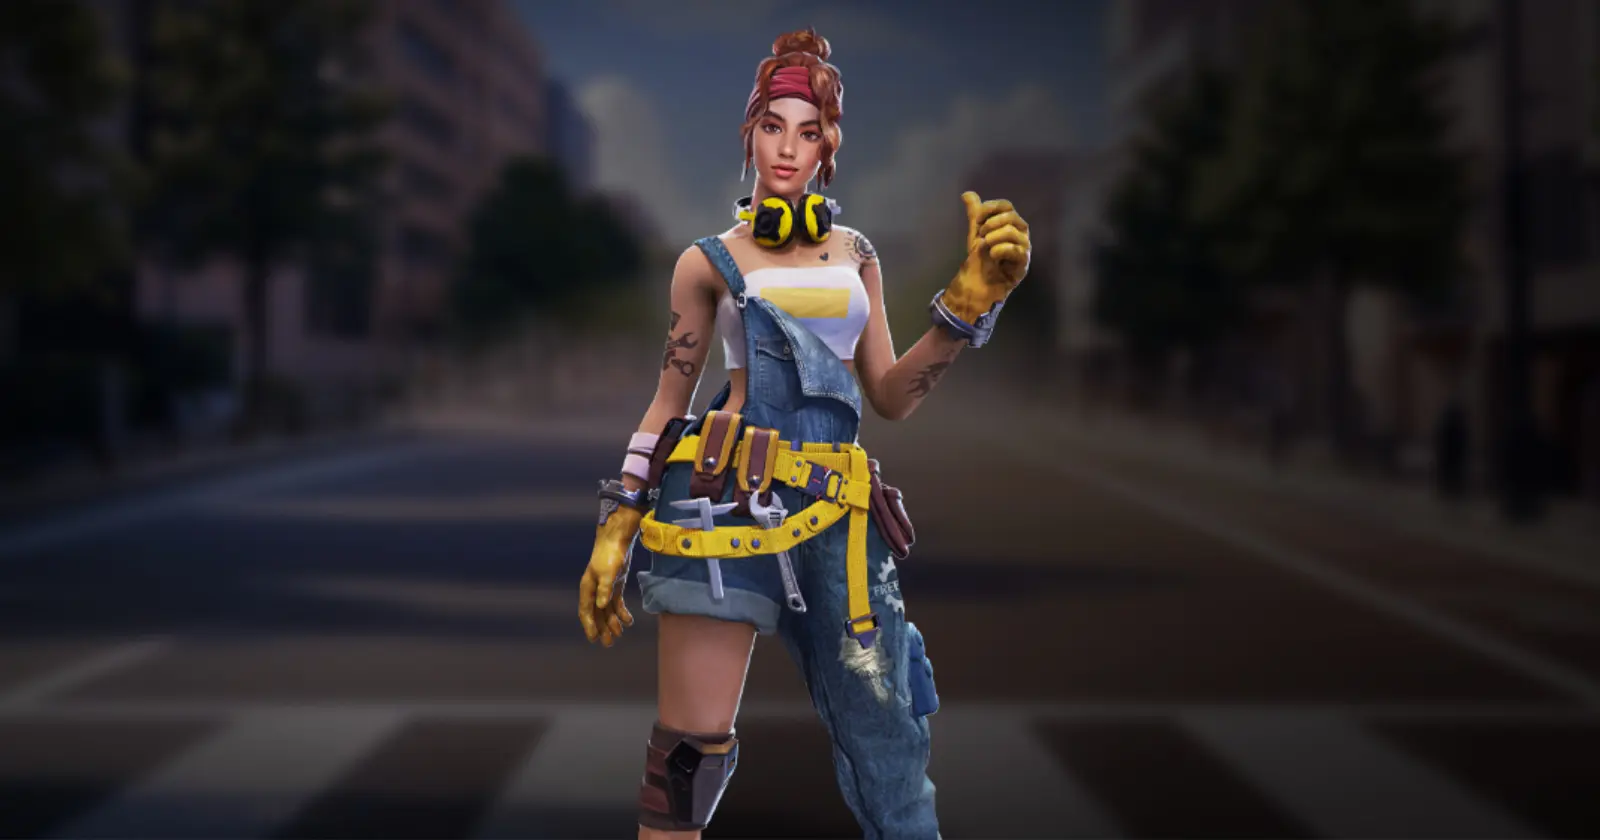 Free Fire Dress Combination Videos - YouTube